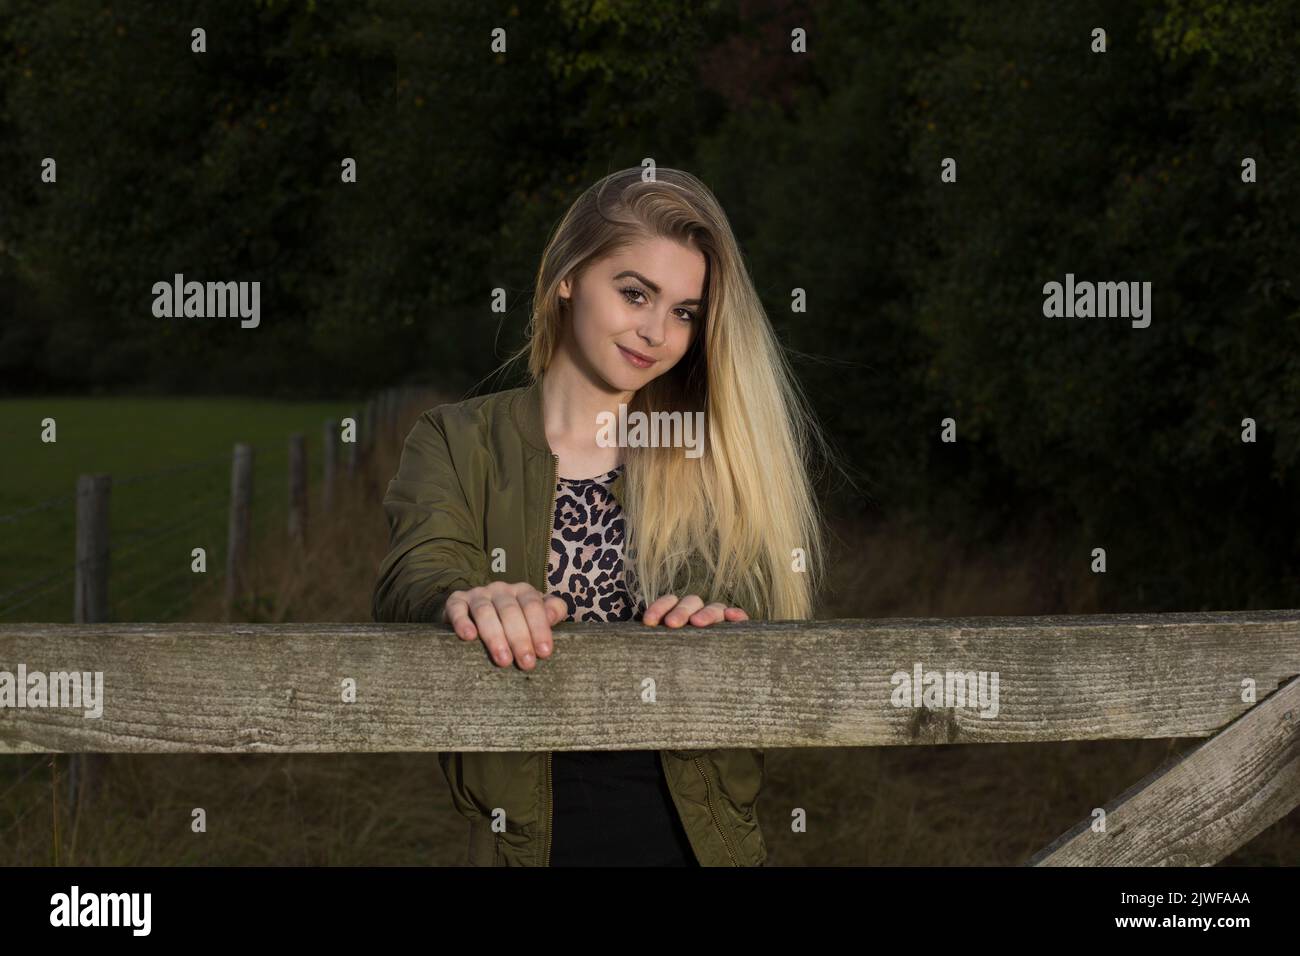 A beautiful blonde teenager leaning on a gate Stock Photo